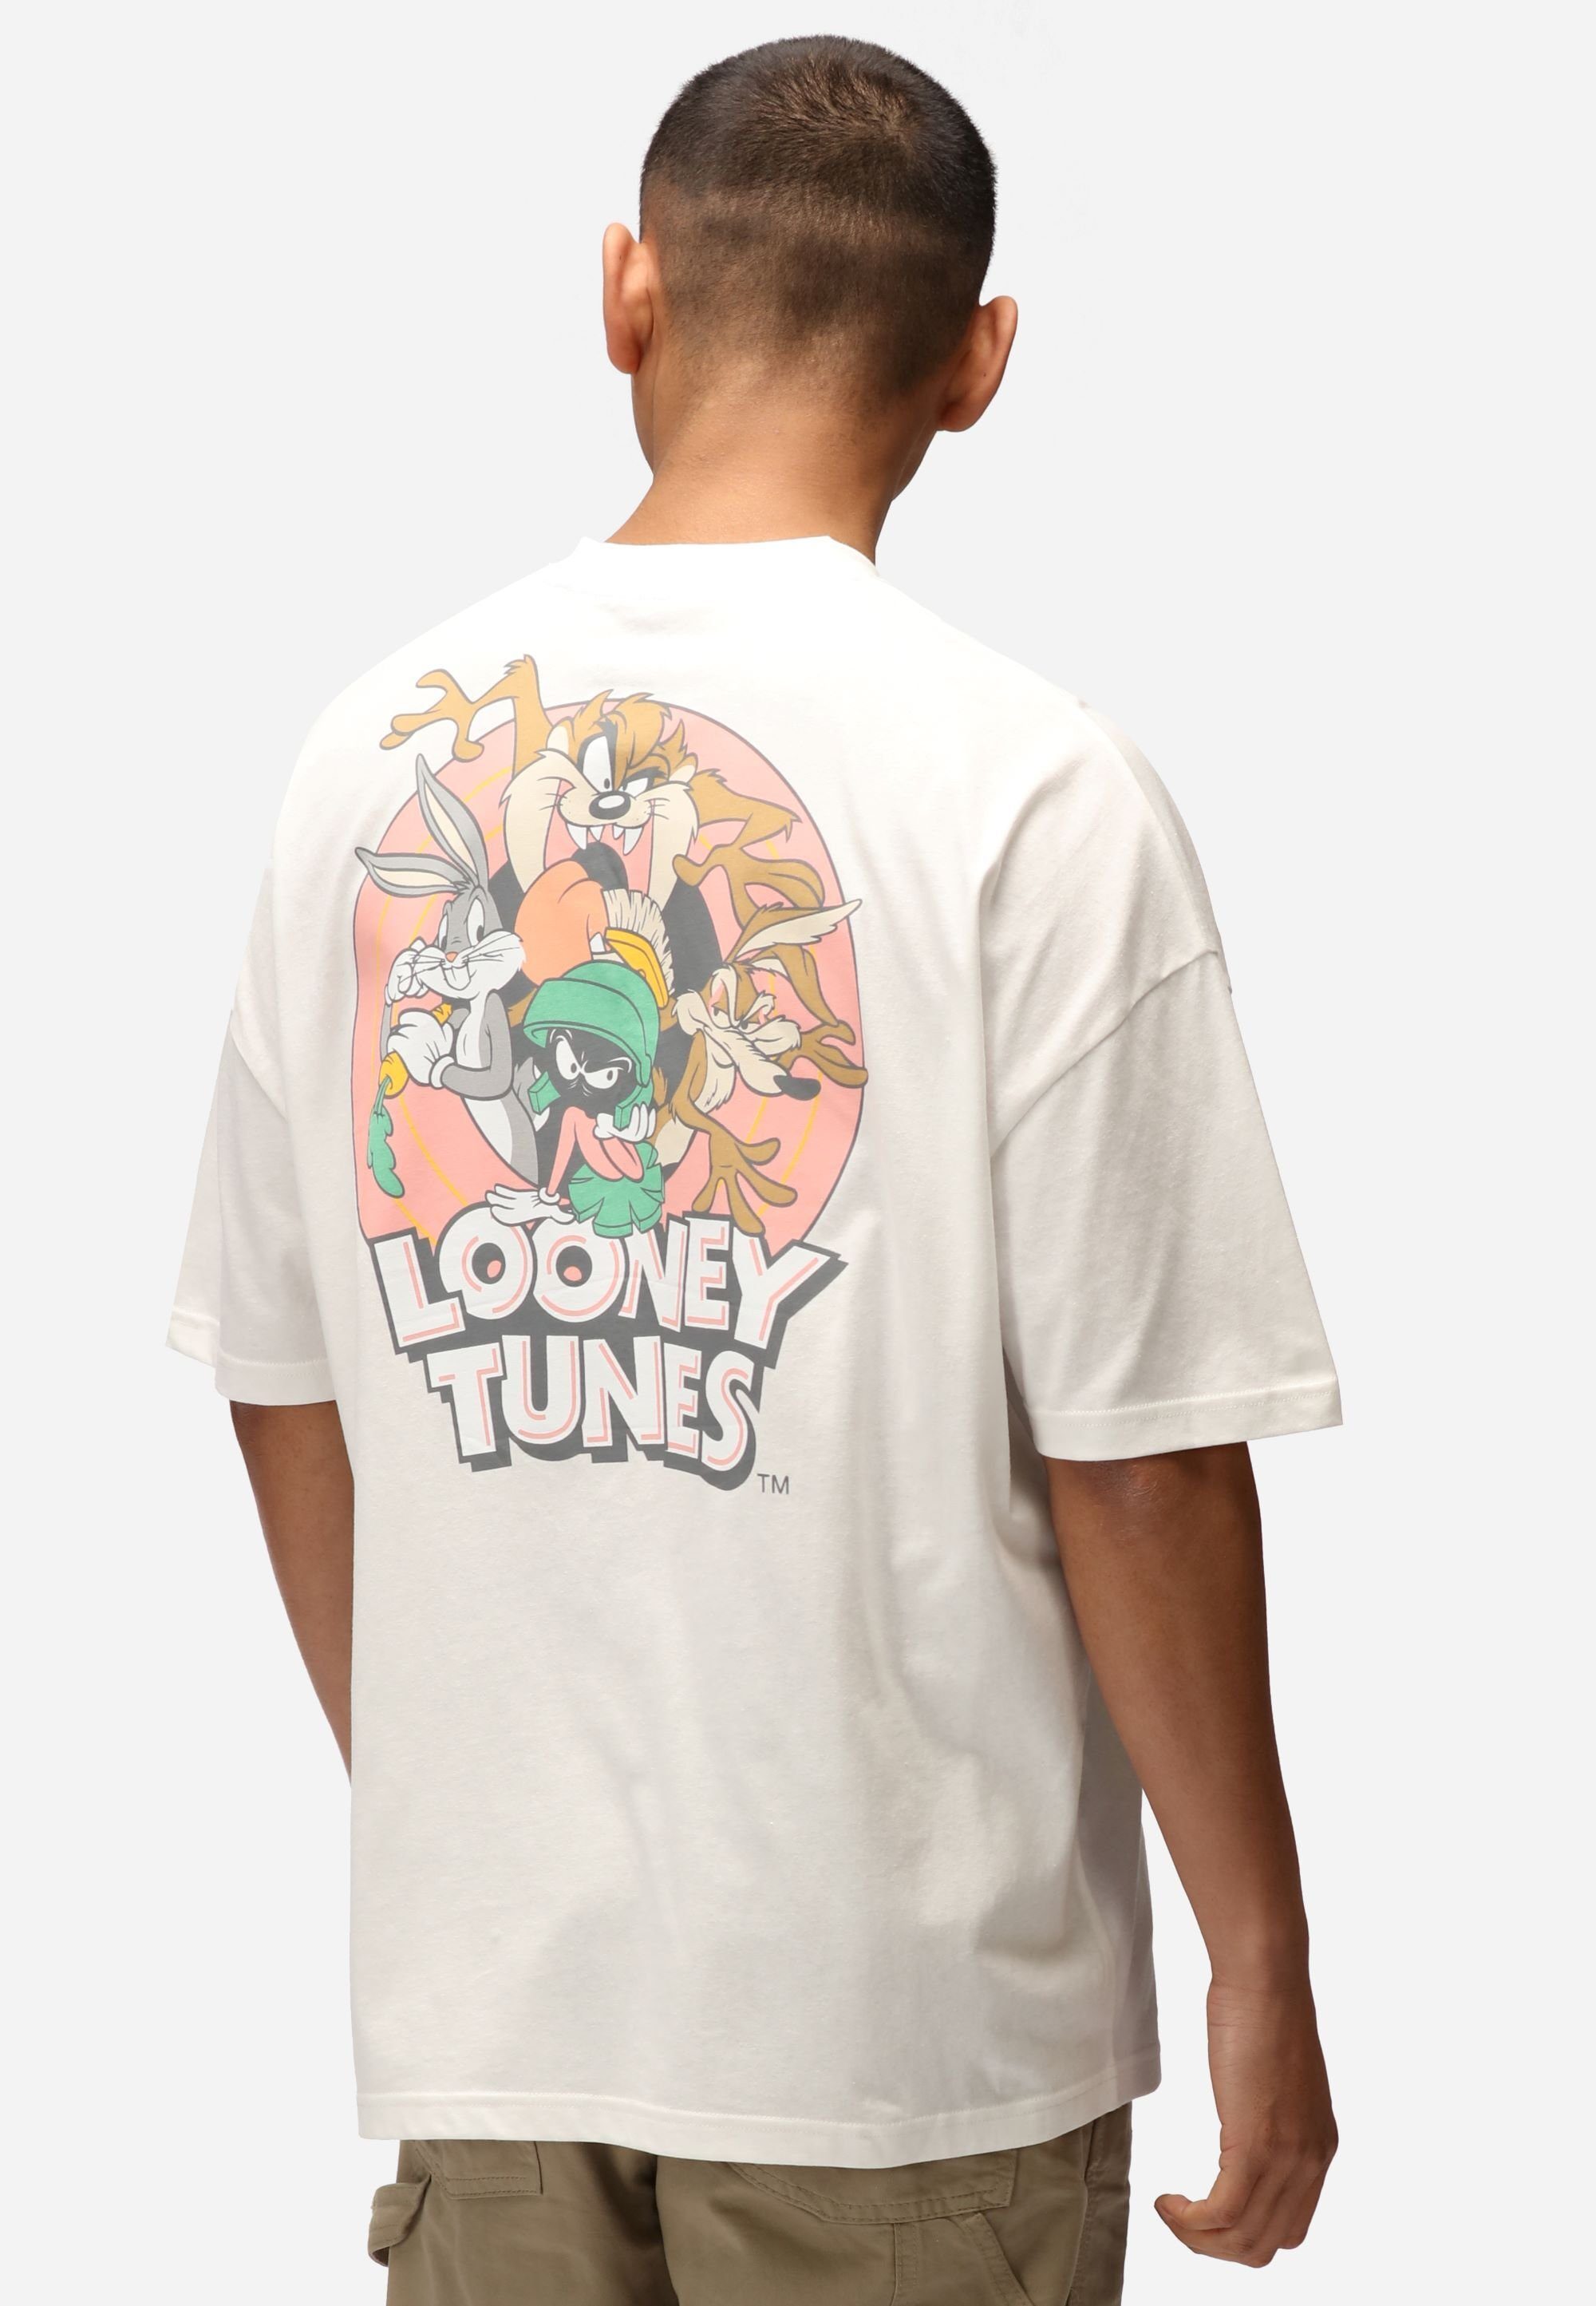 Looney Tunes zertifizierte Central Bio-Baumwolle Recovered GOTS T-Shirt Character